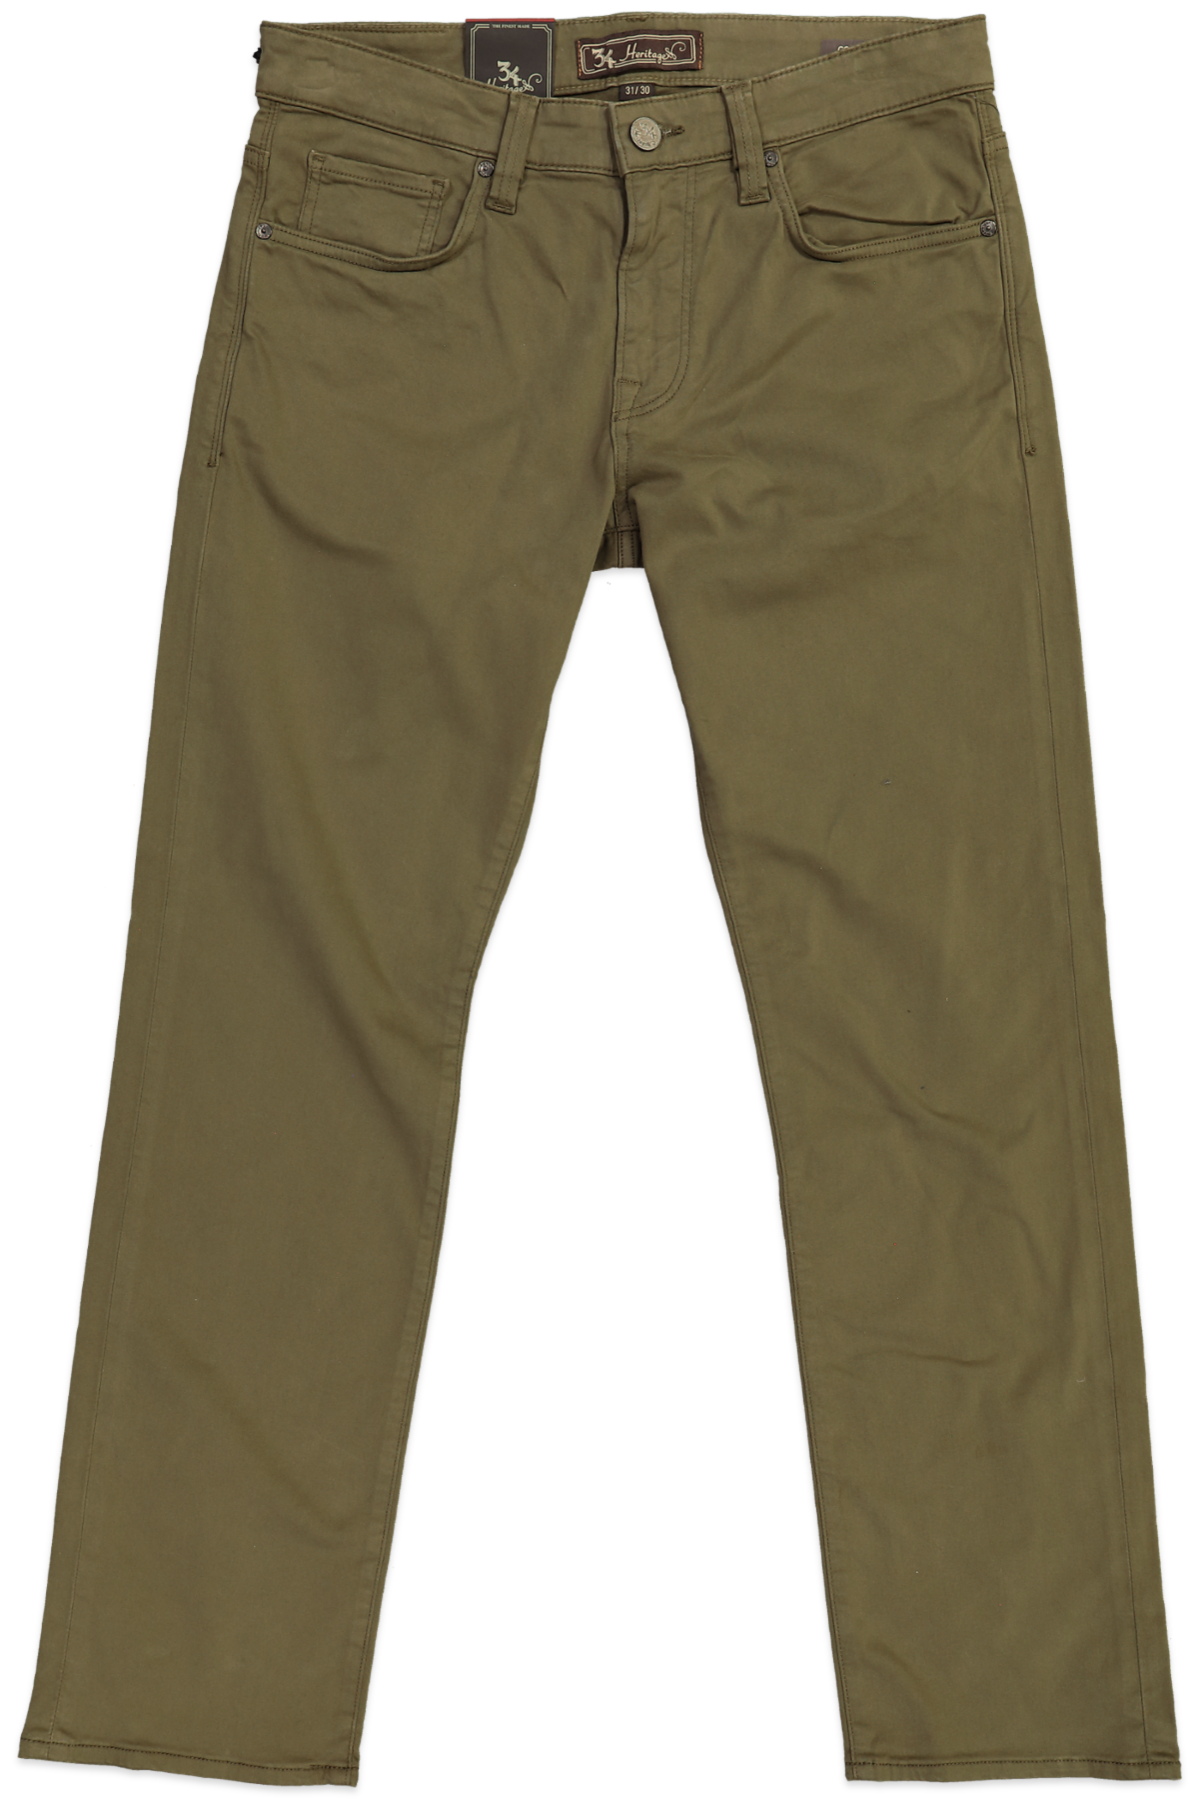 34 HERITAGE COURAGE TWILL GREEN